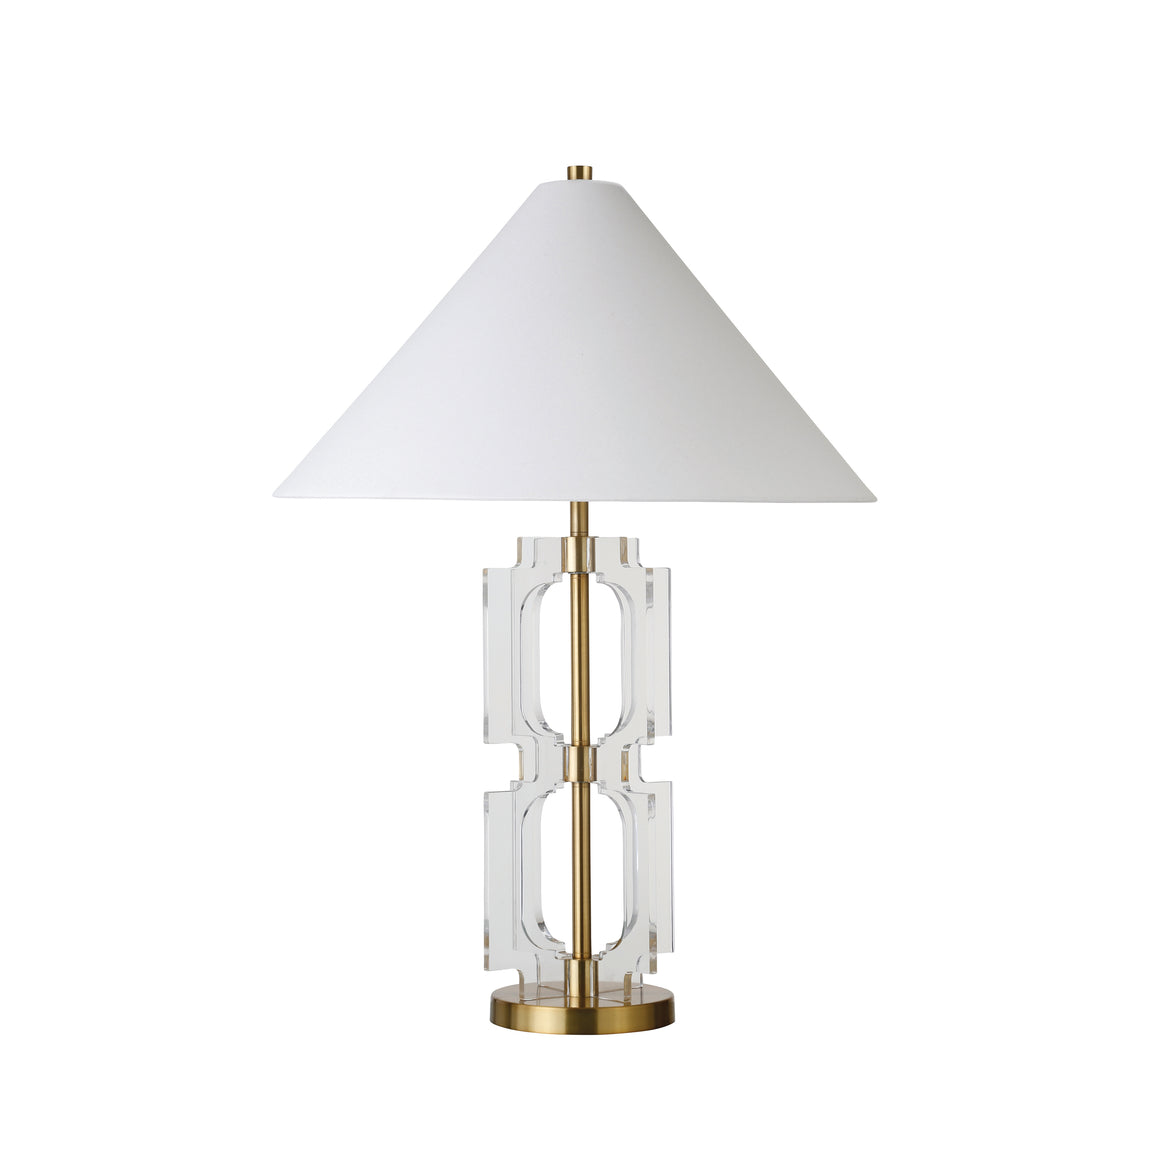 Double Stacked Acrylic Square Table Lamp with Antique Brass Parts